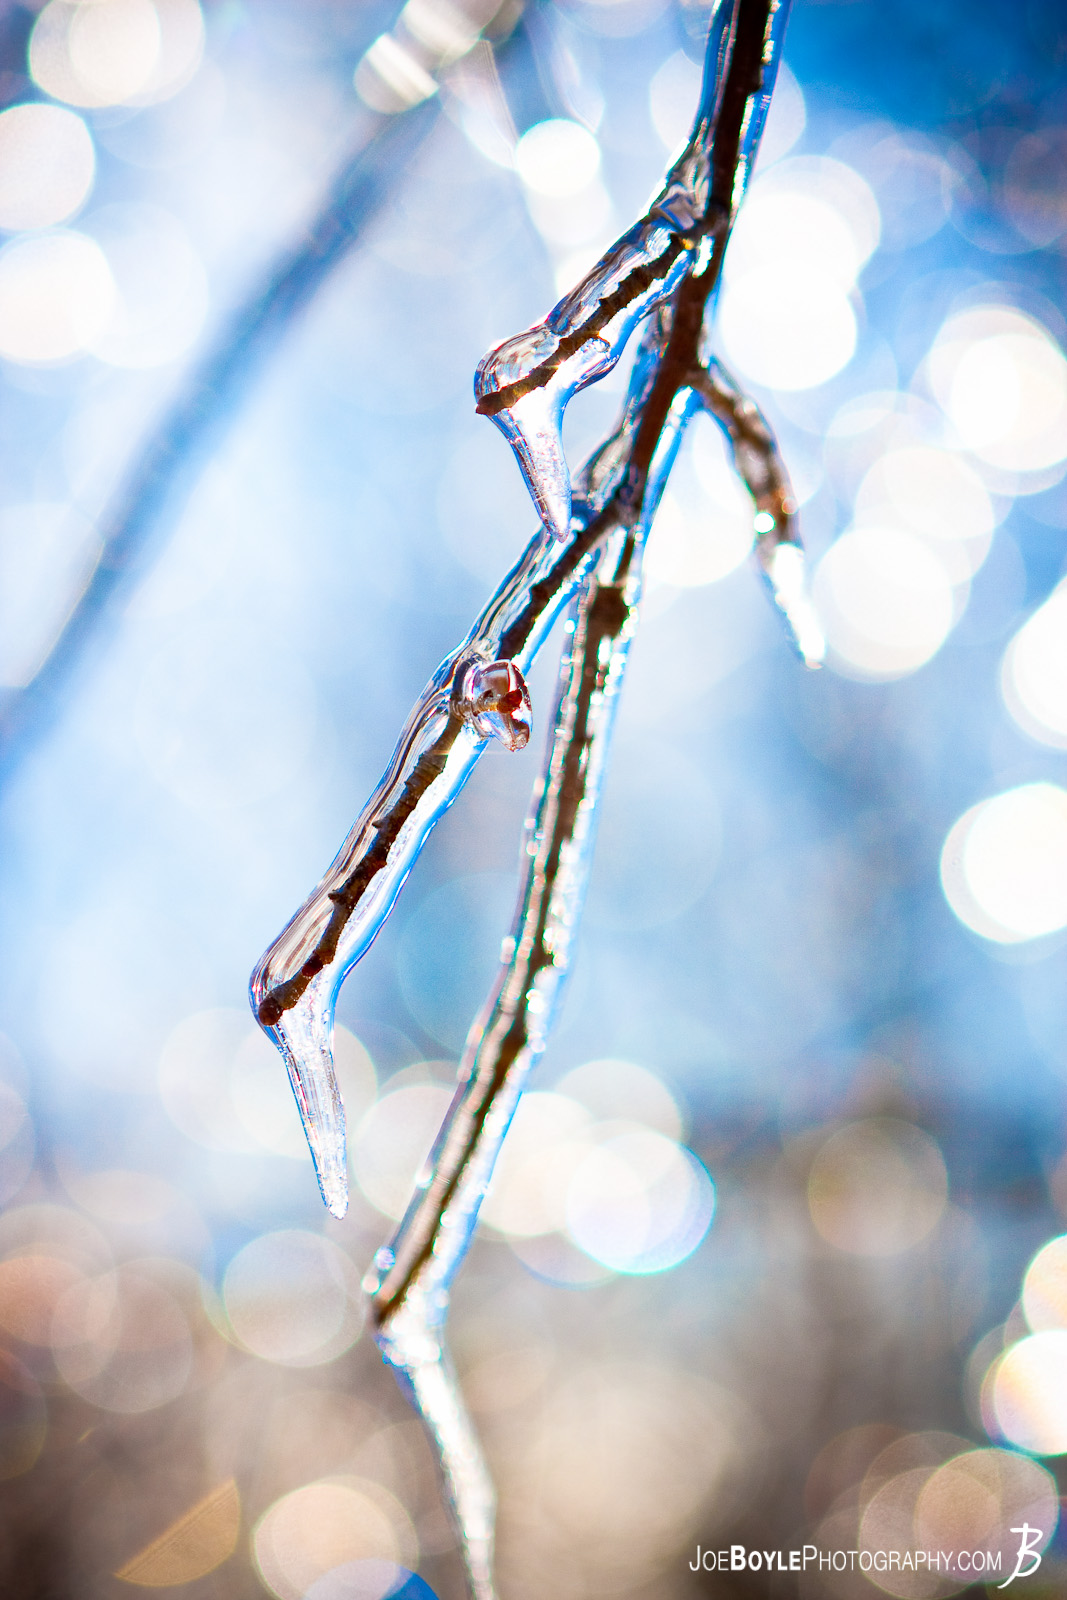  I captured this photo after an ice storm came through the Cleveland area. The storm provided some great picture opportunities that I was able to capture the following day including these ice coated branches! 